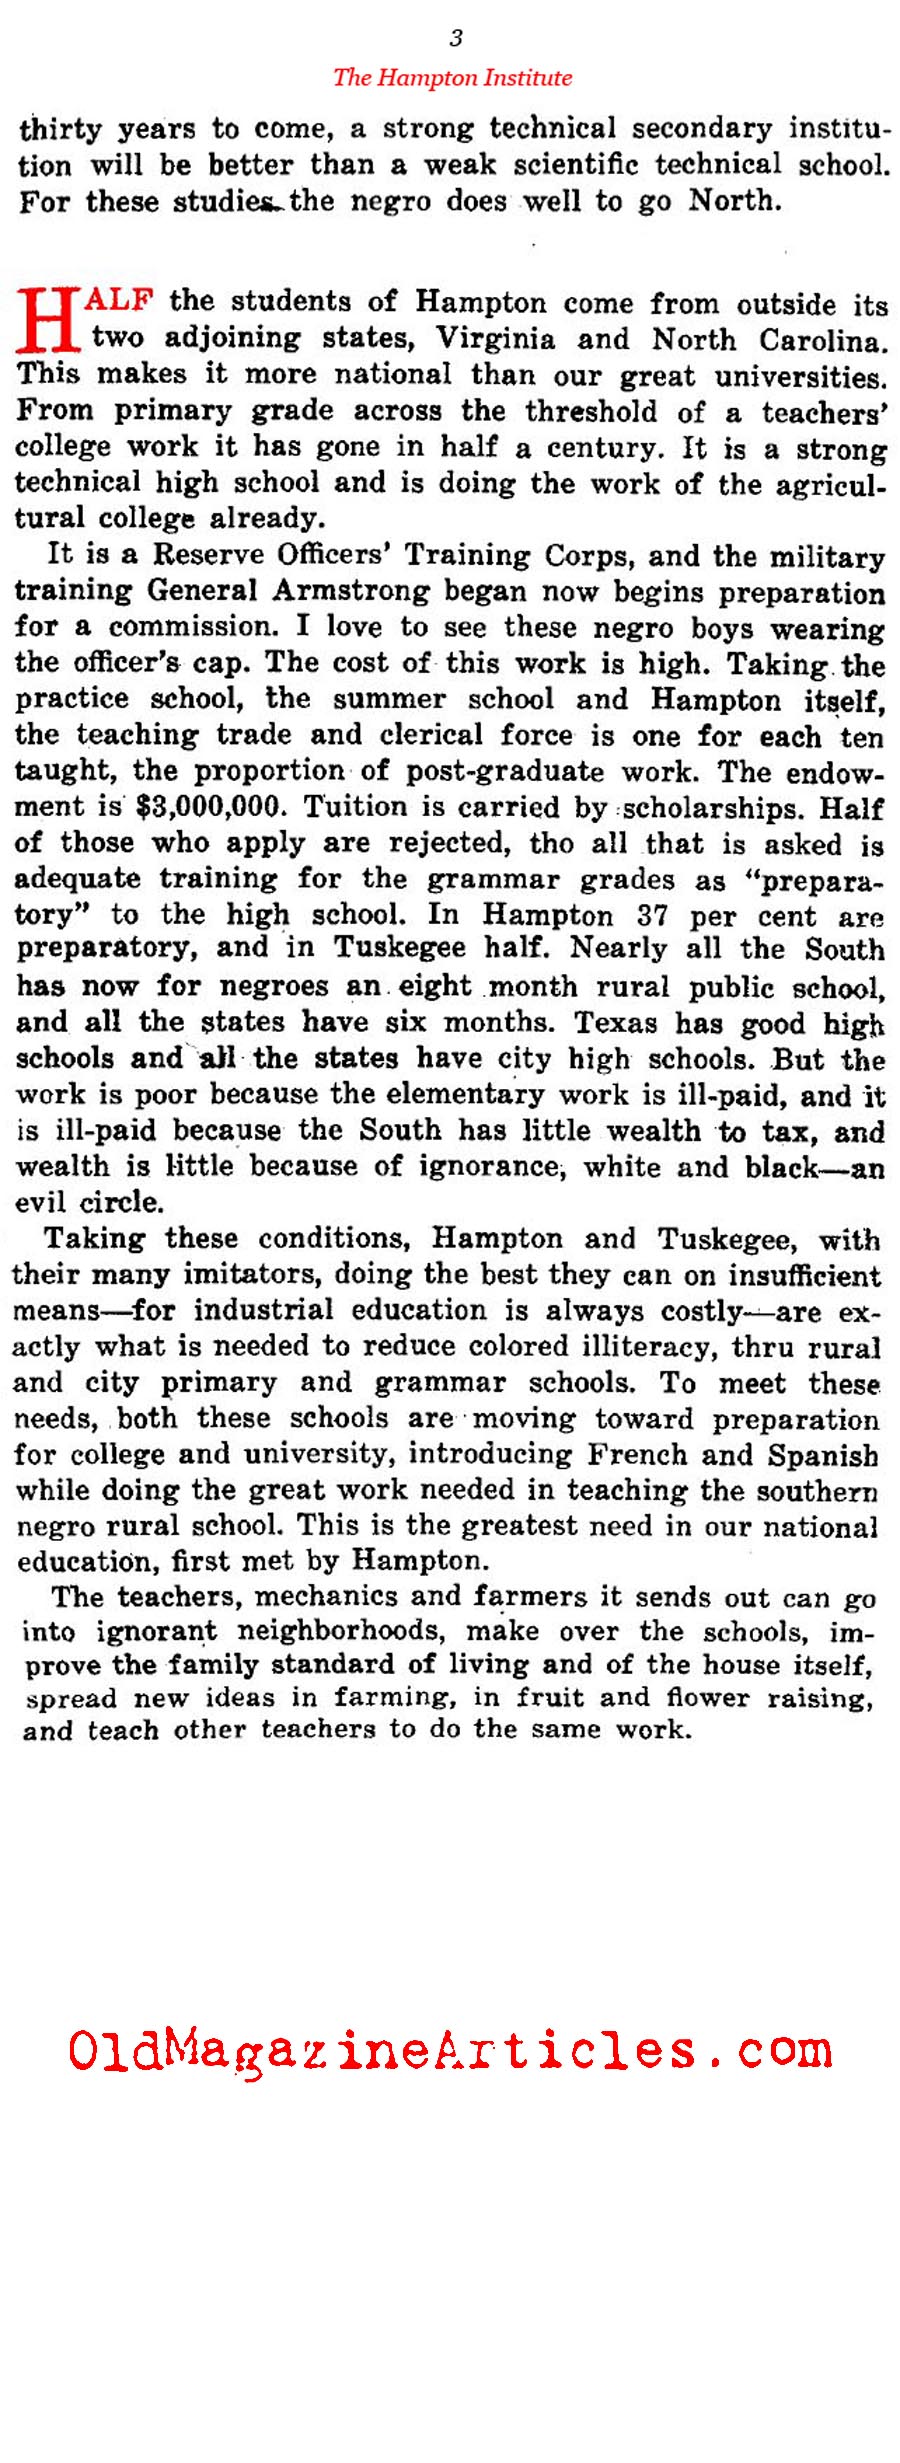  The Hampton Institute as it Stood in 1921 (The Independent, 1921)